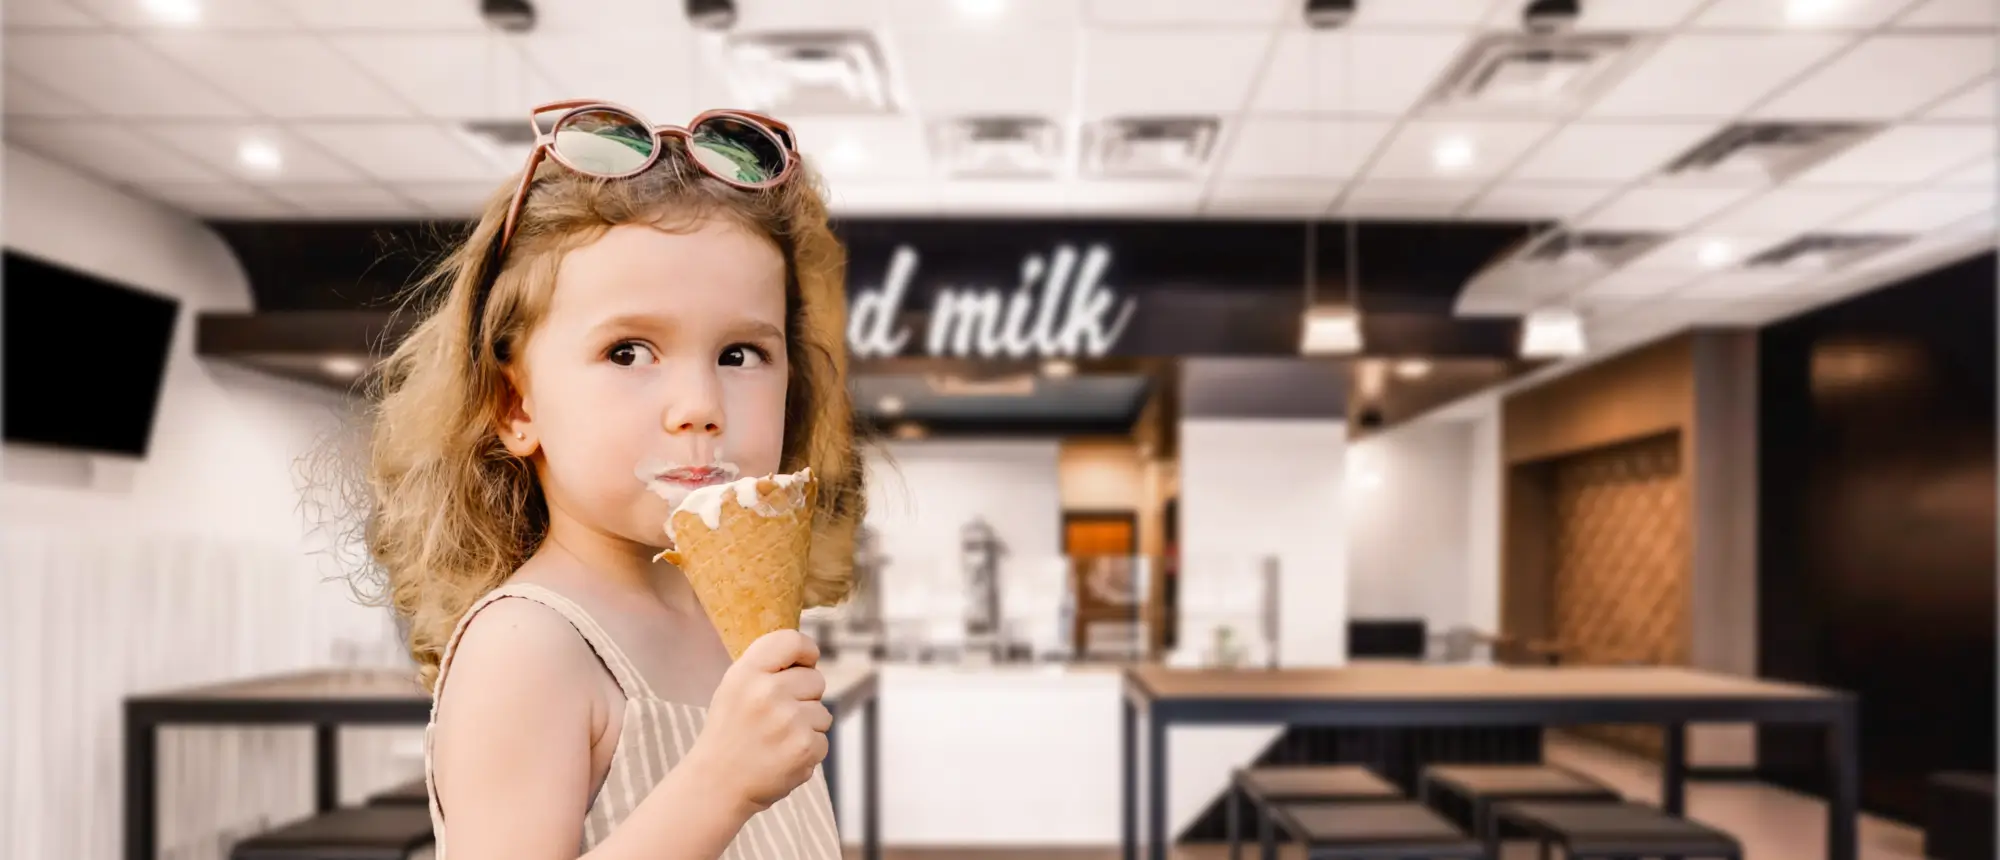 A young girl licking an ice cream cone that has almost been finished inside of a spilled milk store